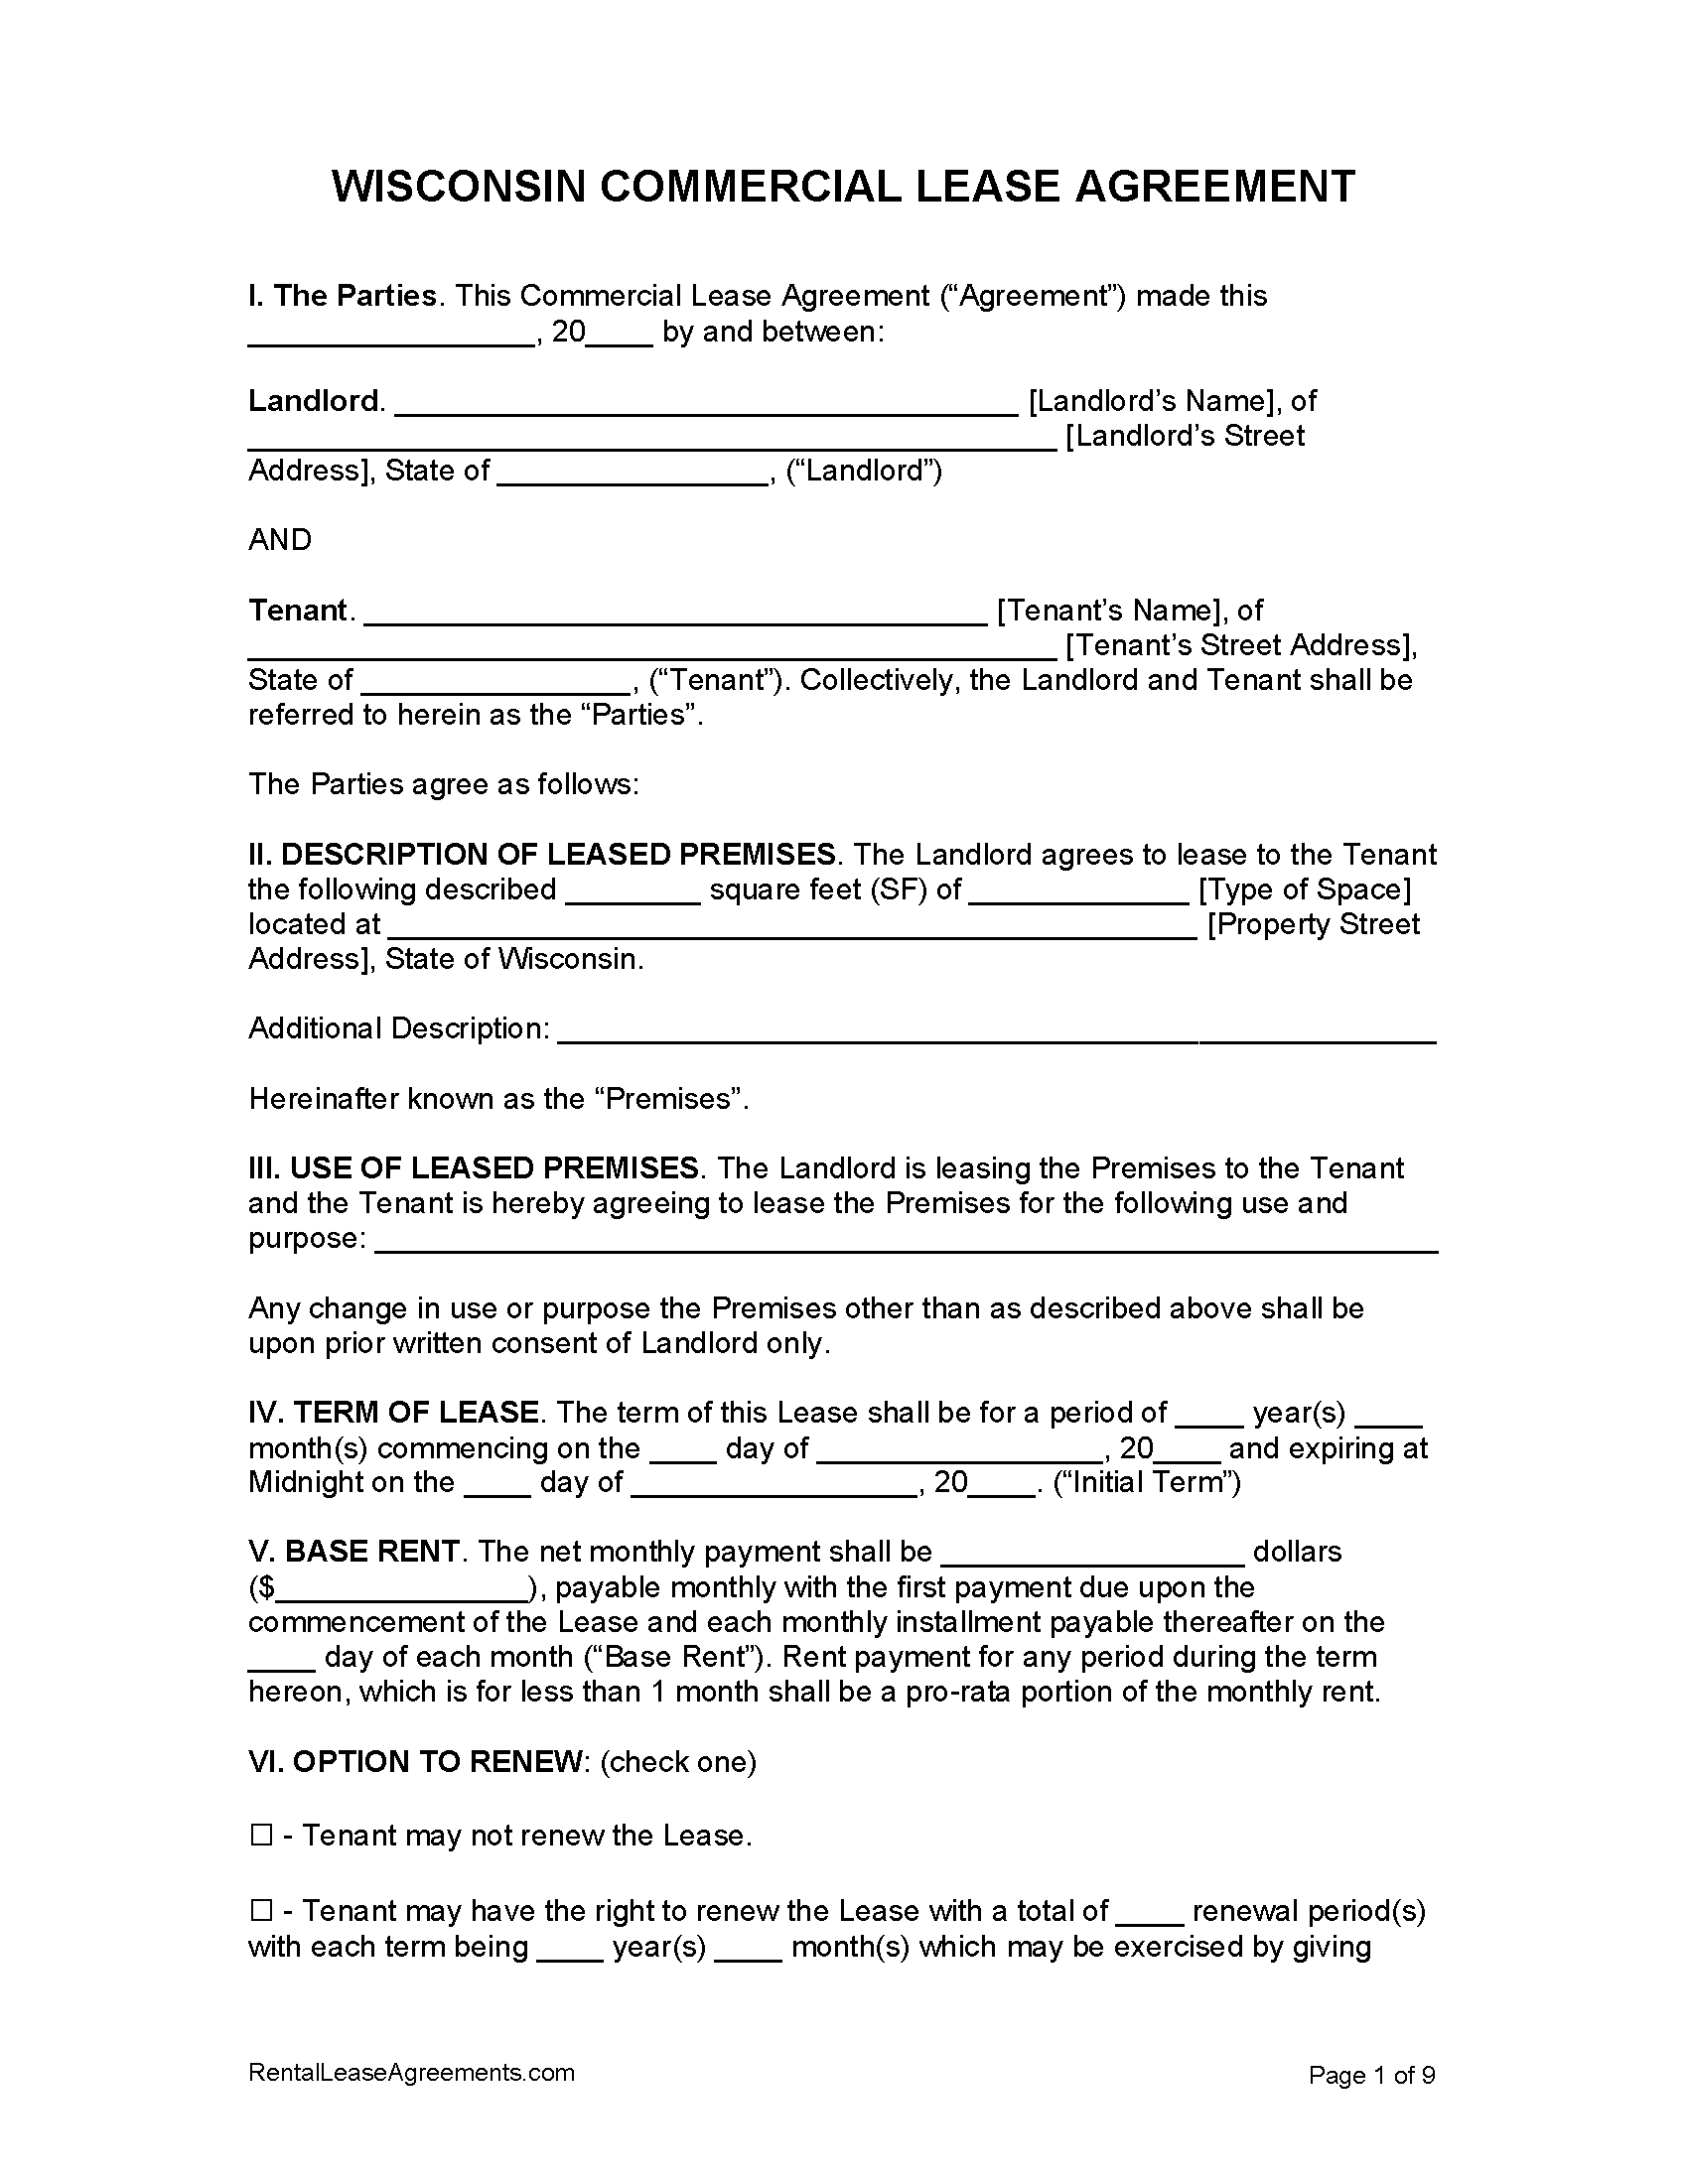 free-wisconsin-commercial-lease-agreement-pdf-ms-word